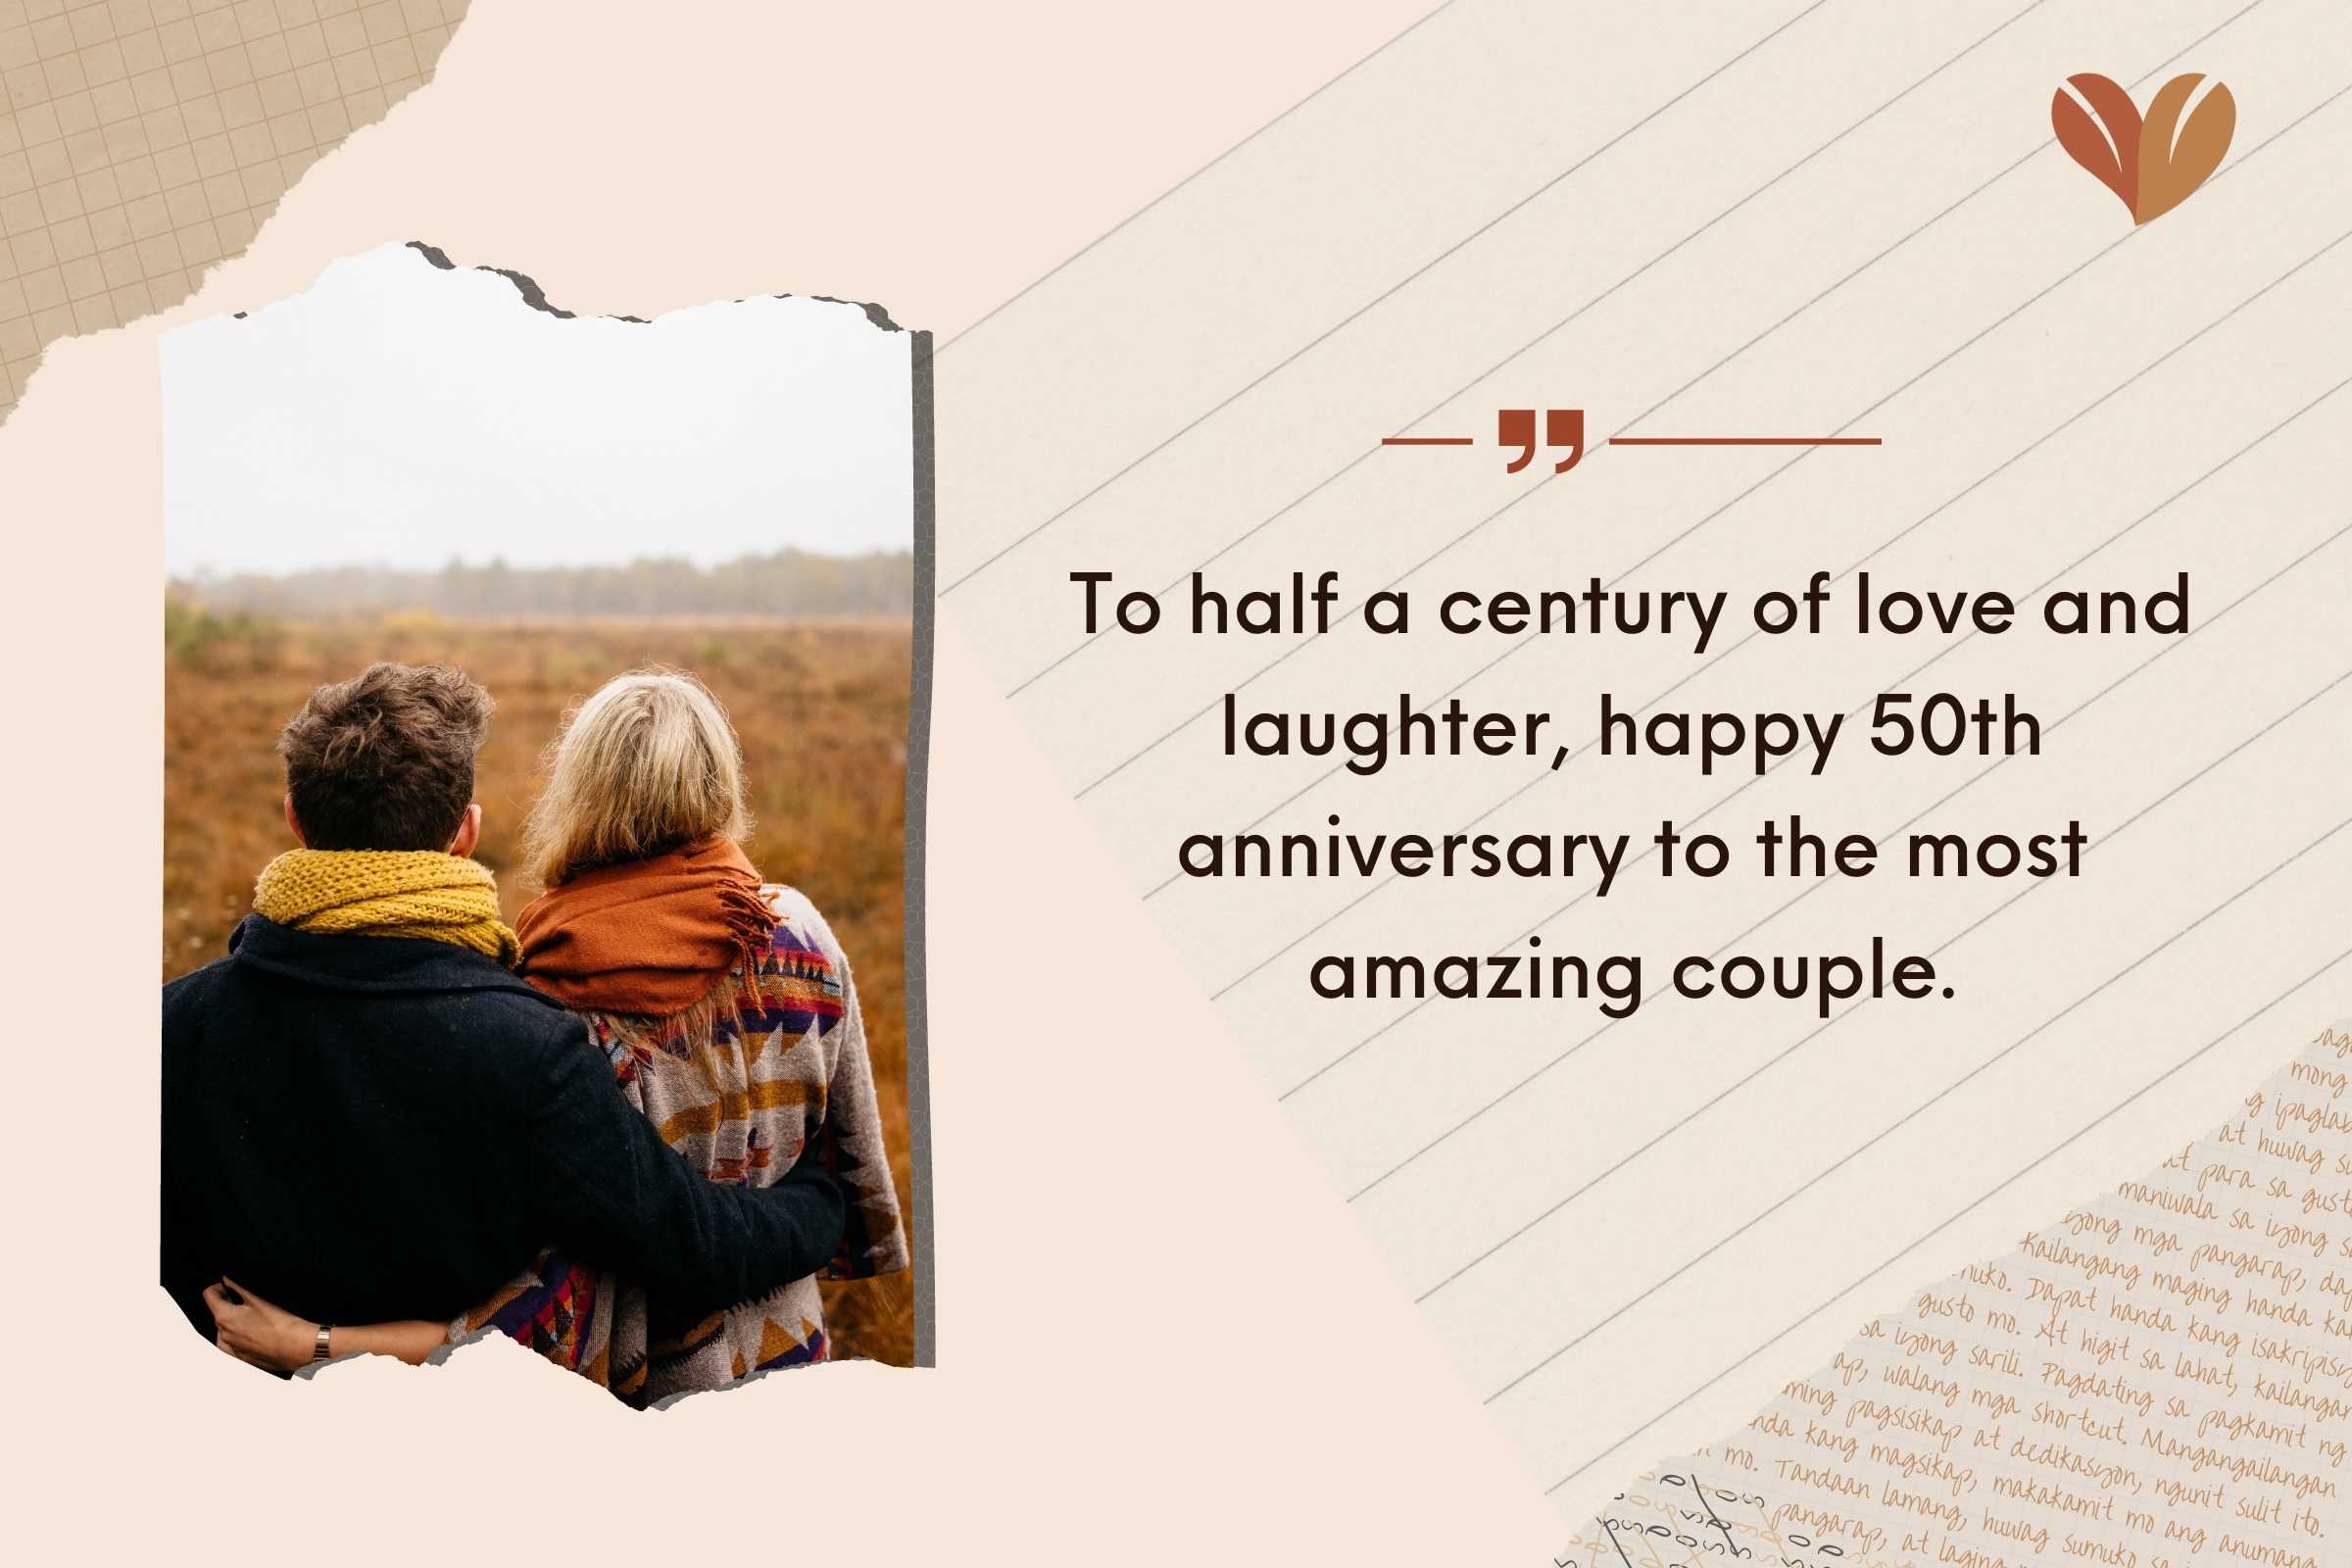 An affectionate couple, a perfect backdrop for anniversary card messages.